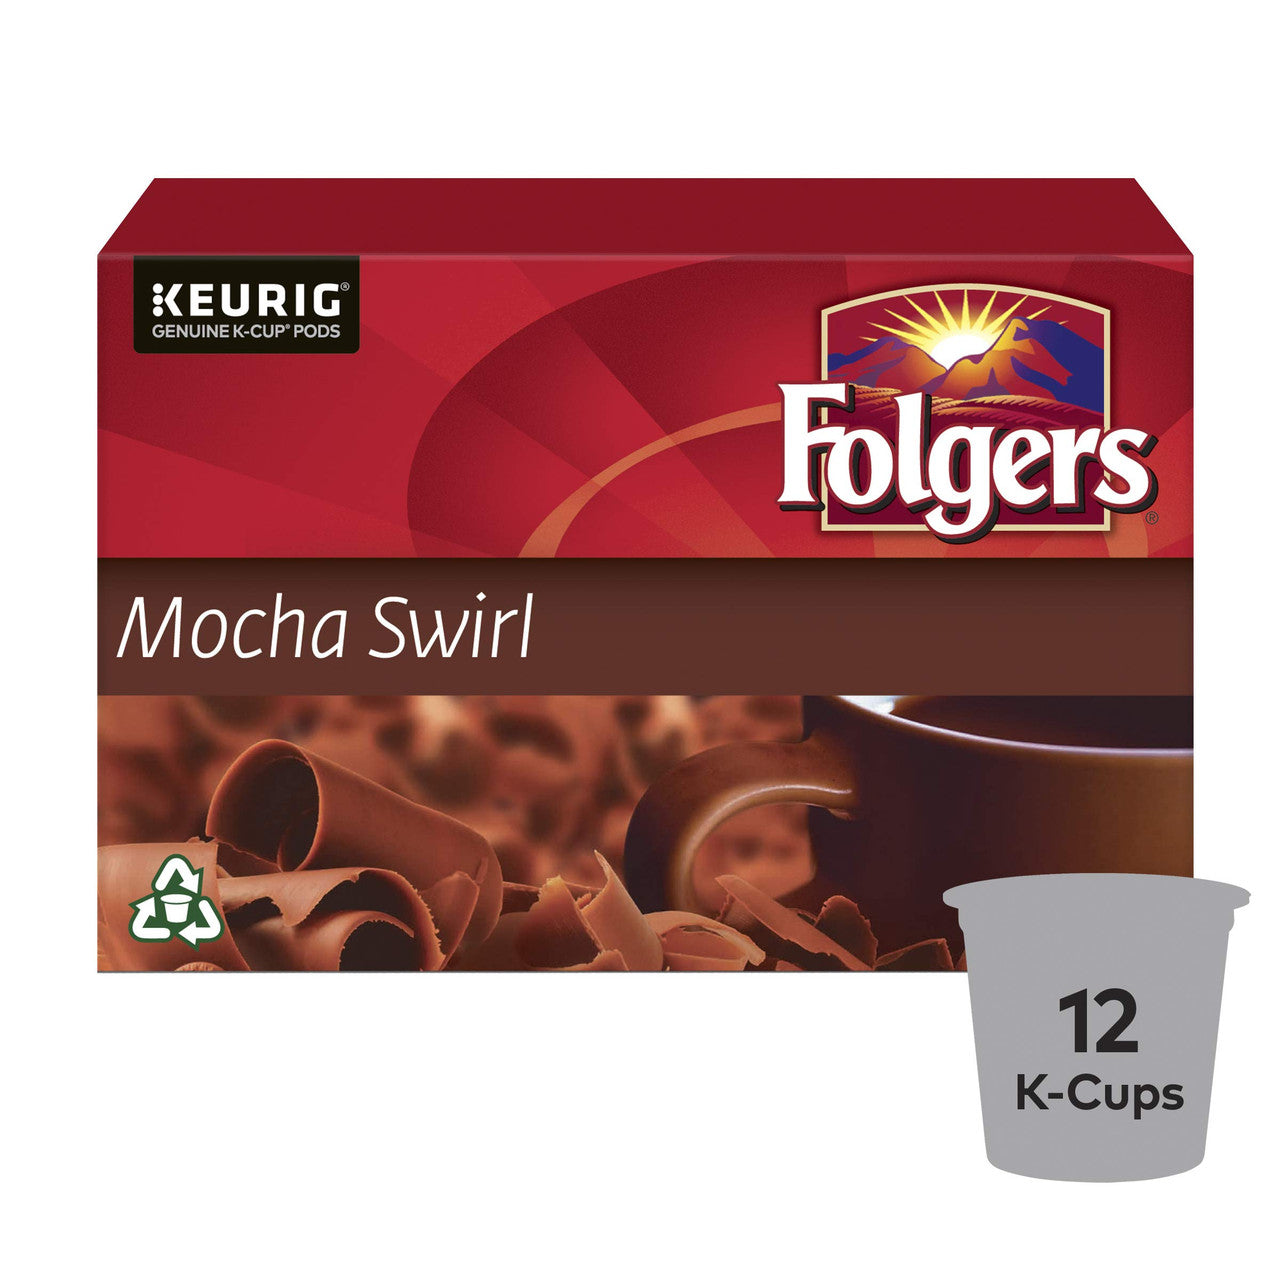 Folgers Mocha Swirl K-Cup Coffee Pods, 12 pods, 108g, {Imported from Canada}